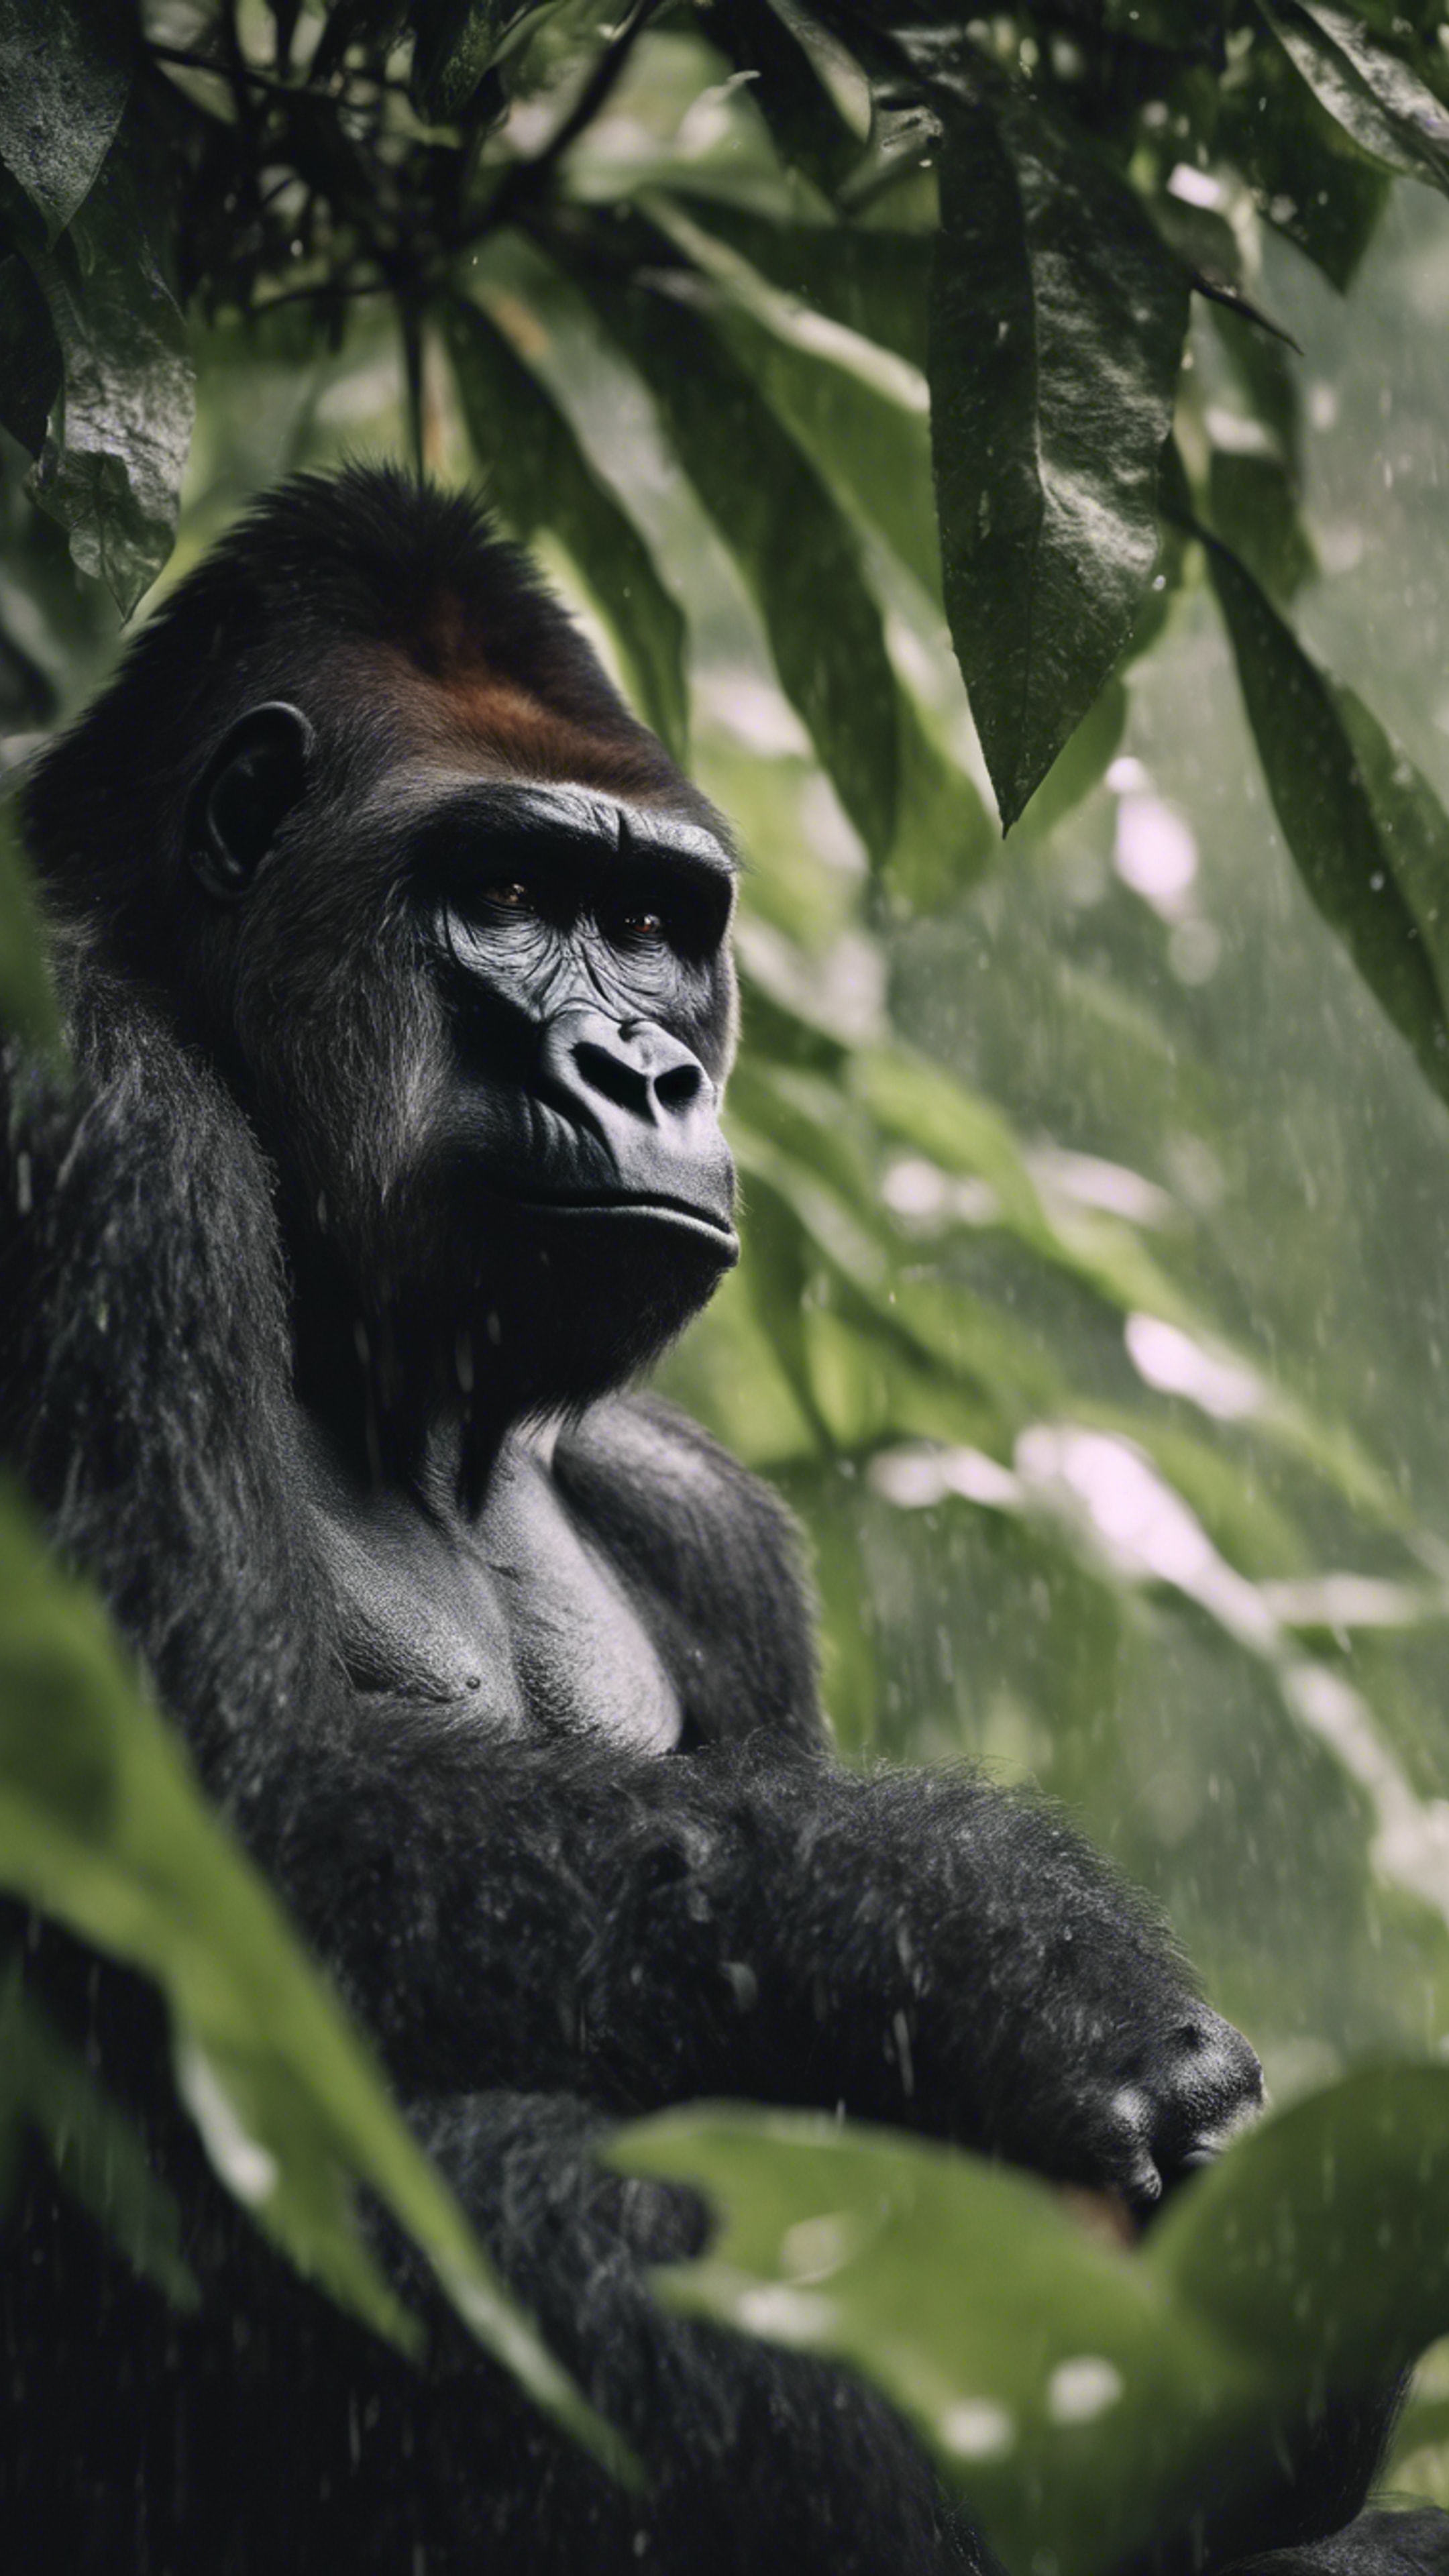 A sad gorilla on a rainy day, gazing out from under the shelter of giant leaves. Tapeta[ce7c66a51f504b8e8f6d]